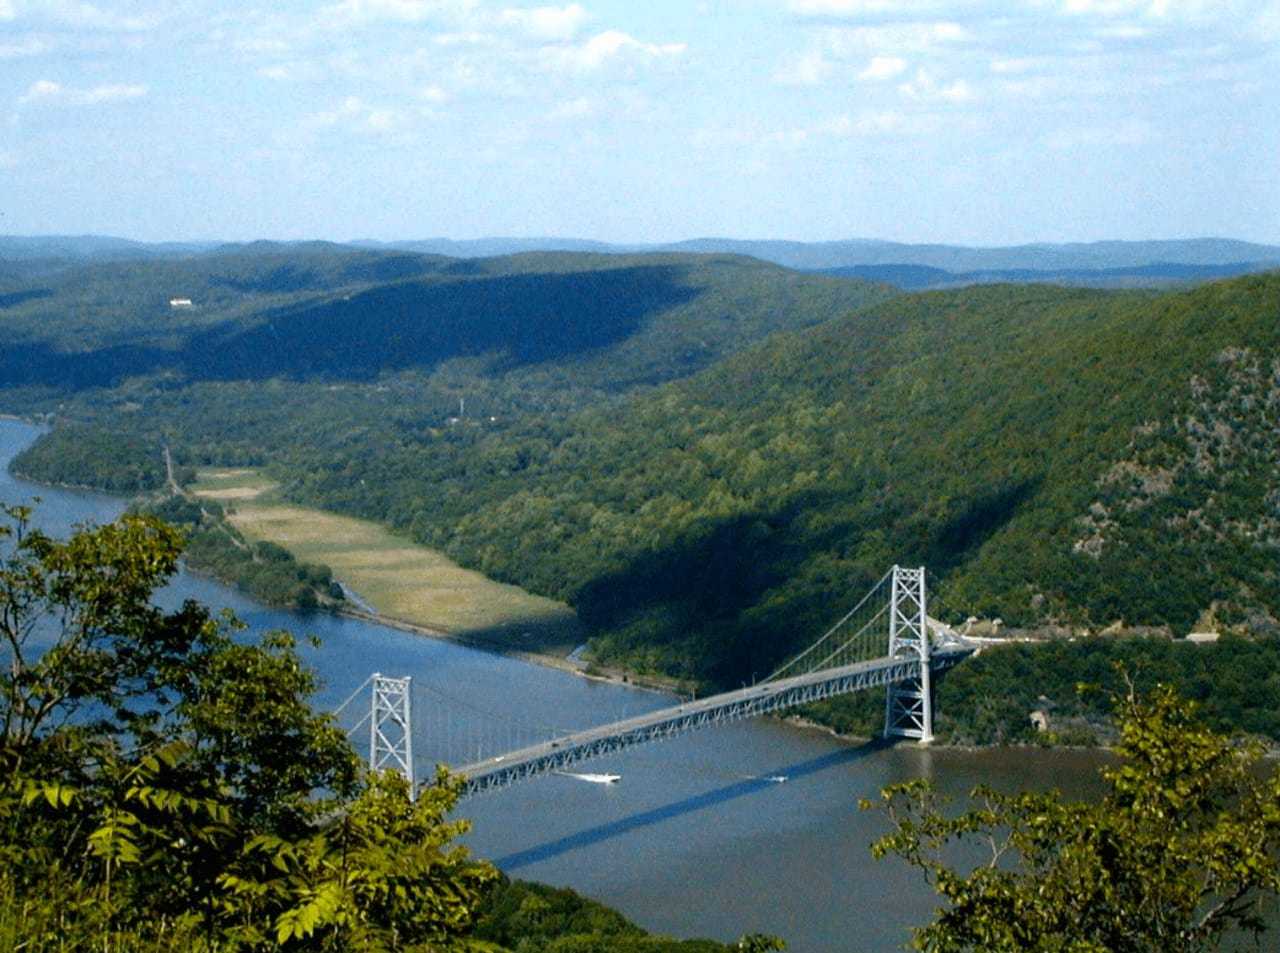   
																Body Recovered After Person Jumps From Bear Mountain Bridge 
															 